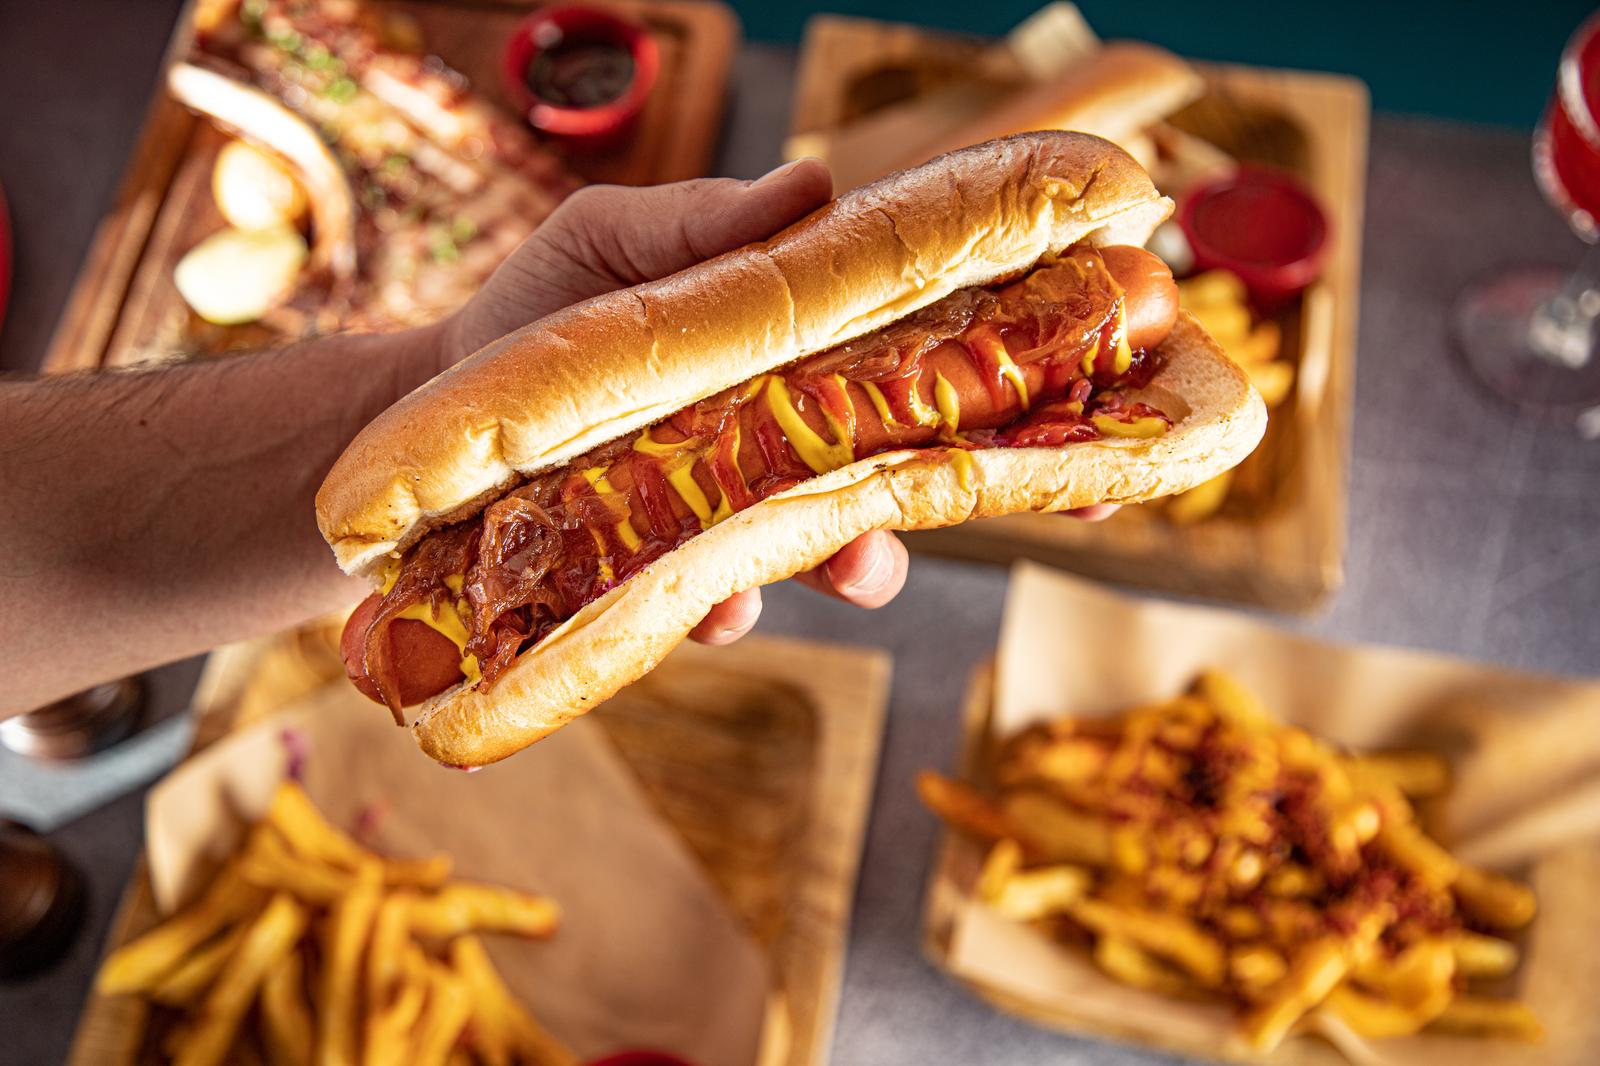 Can I Guess Mood You Are in RN by Foods You Wanna Have? Quiz Hot dog